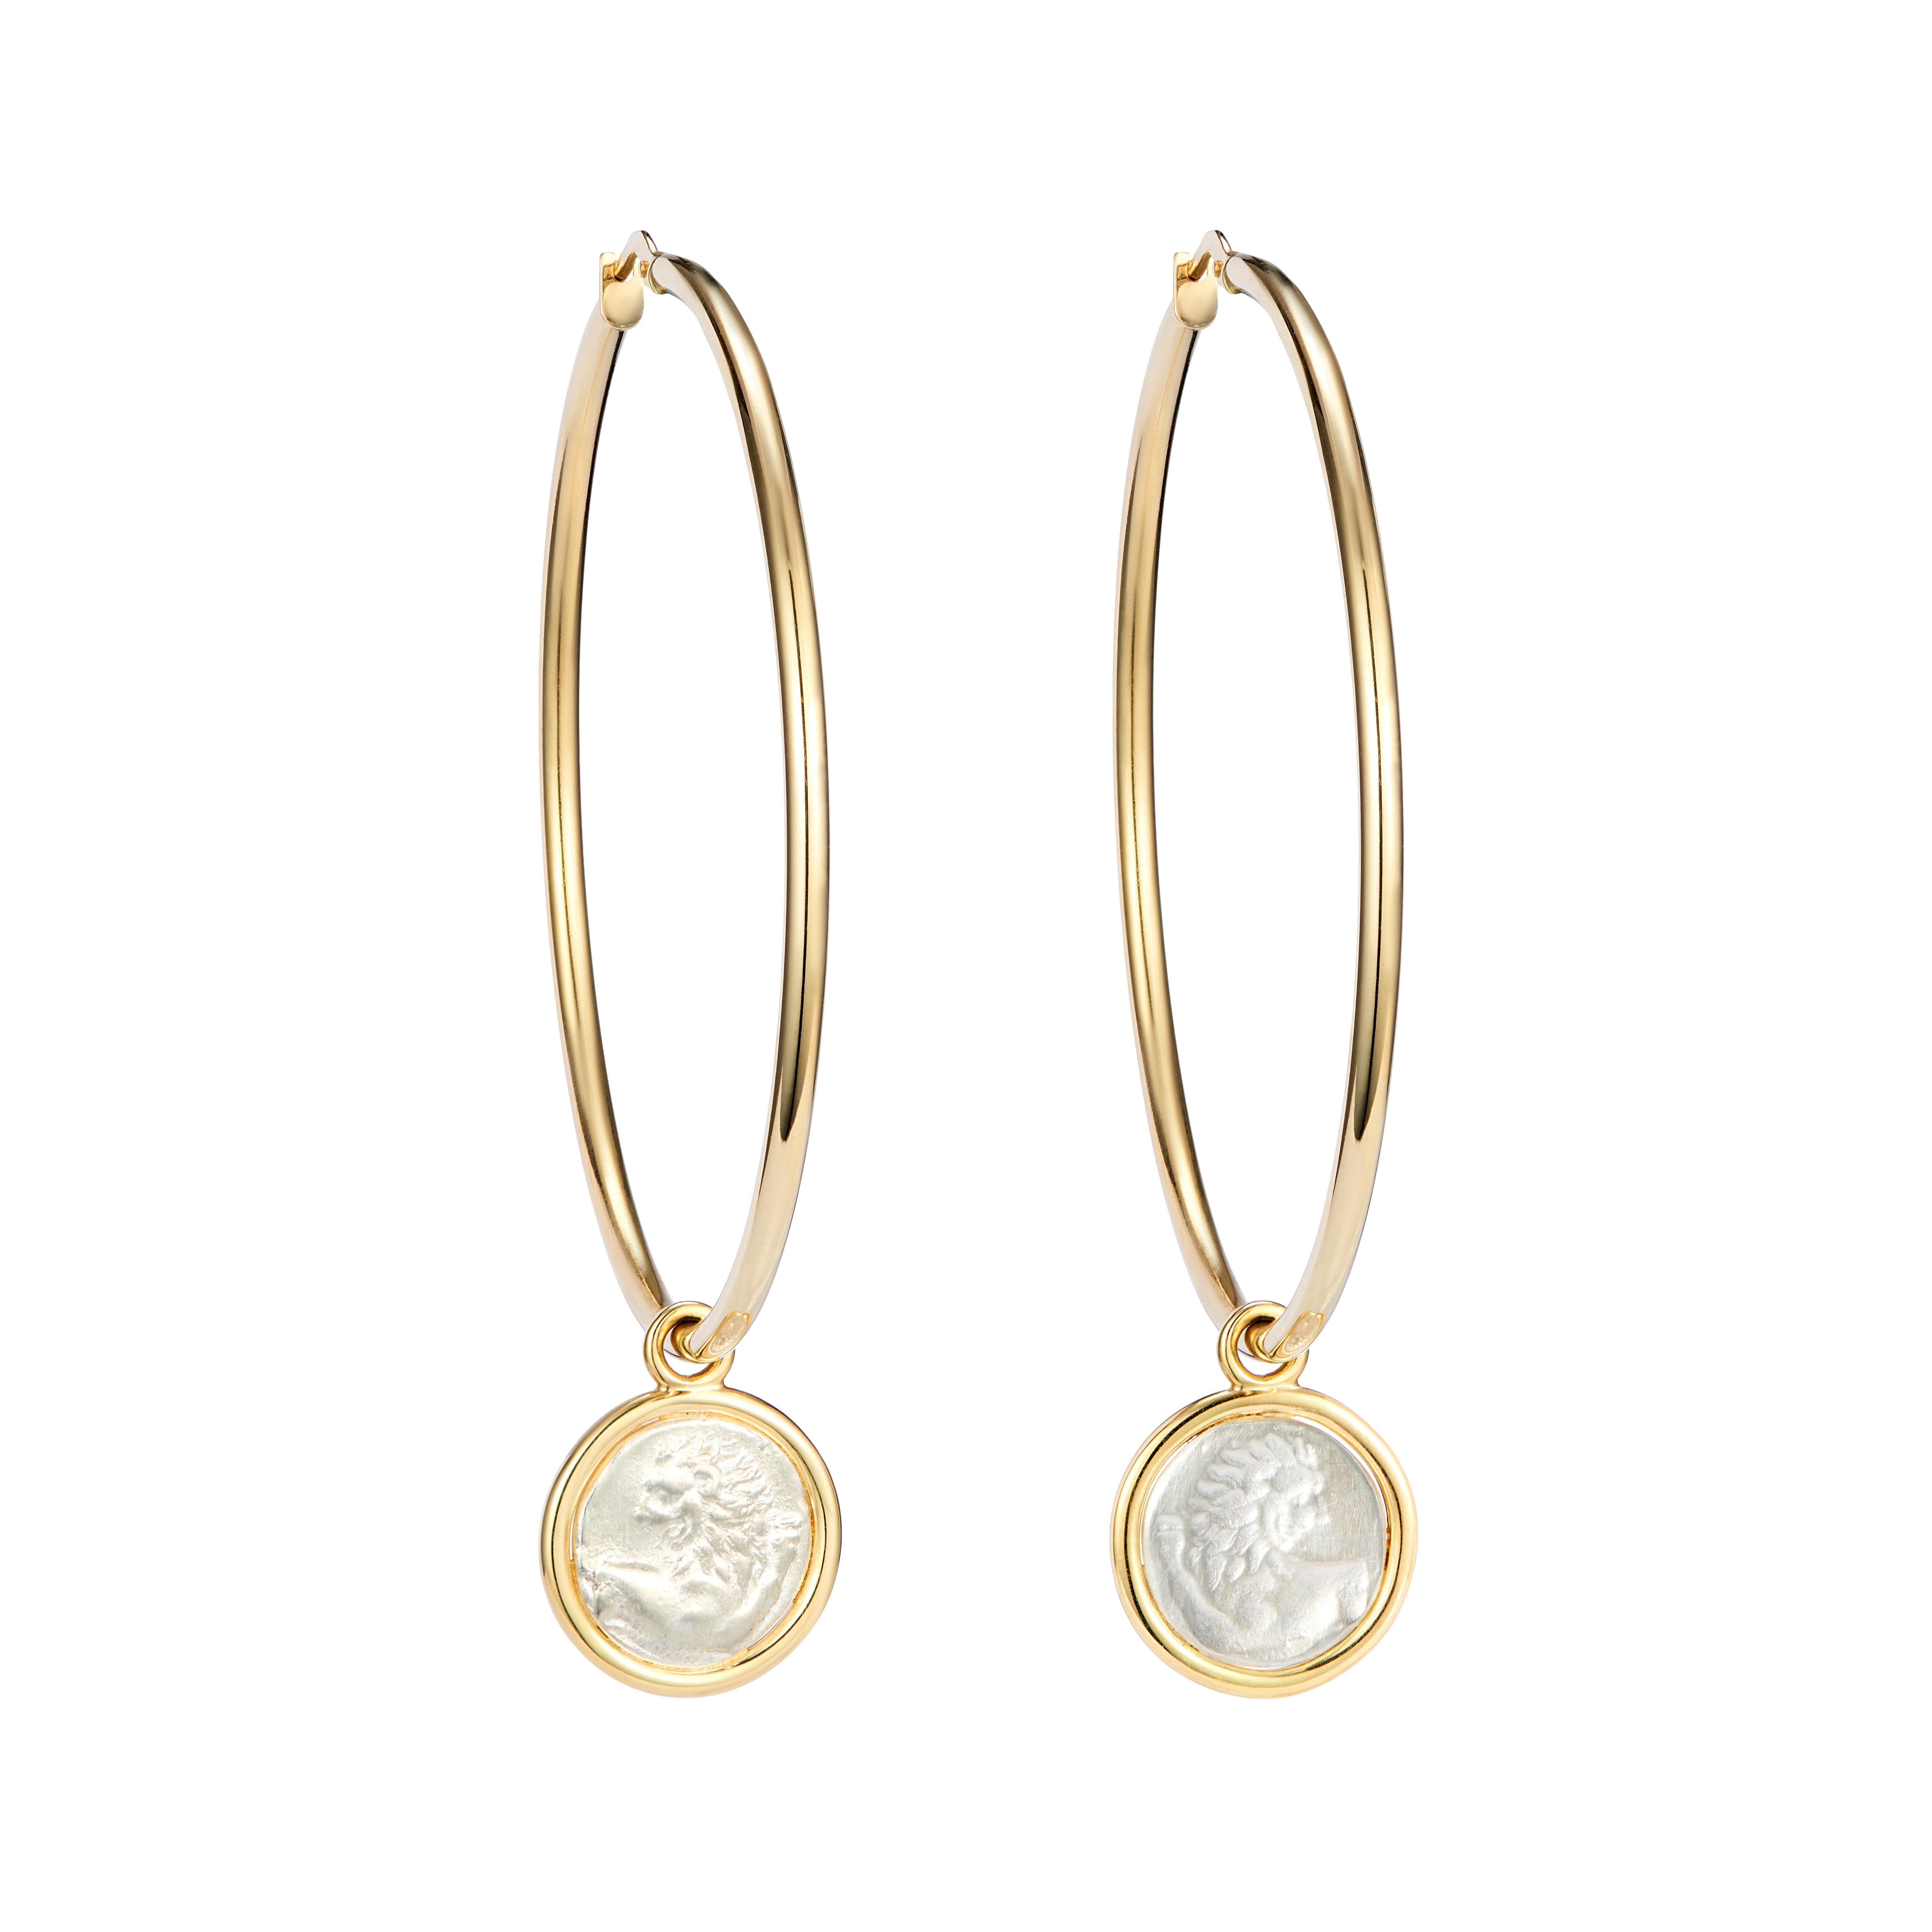 These Dubini coin hoop earrings from the 'Empires' collection feature sterling silver replicas of Thracian silver coin minted circa 4th century B.C. set in 18kt yellow gold.

Chersonesos was founded in the 8th Century B.C. by settlers from Thrace.